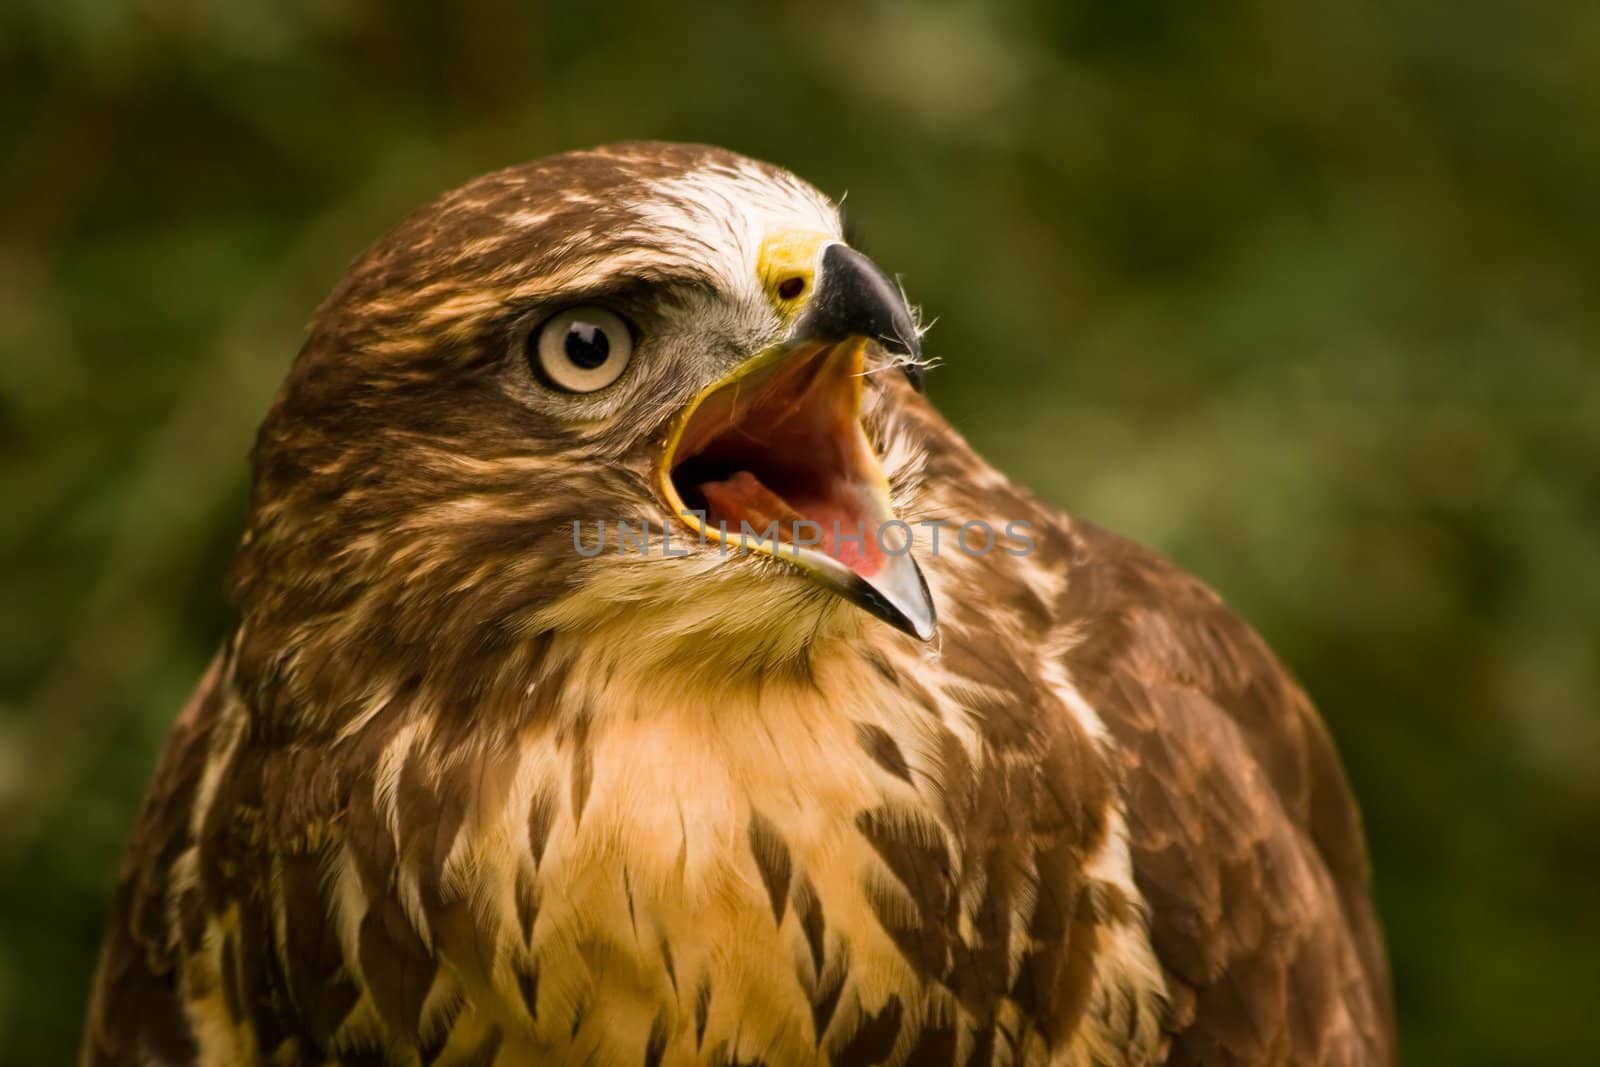 Buzzard, a bird of prey, which is loudly screaming